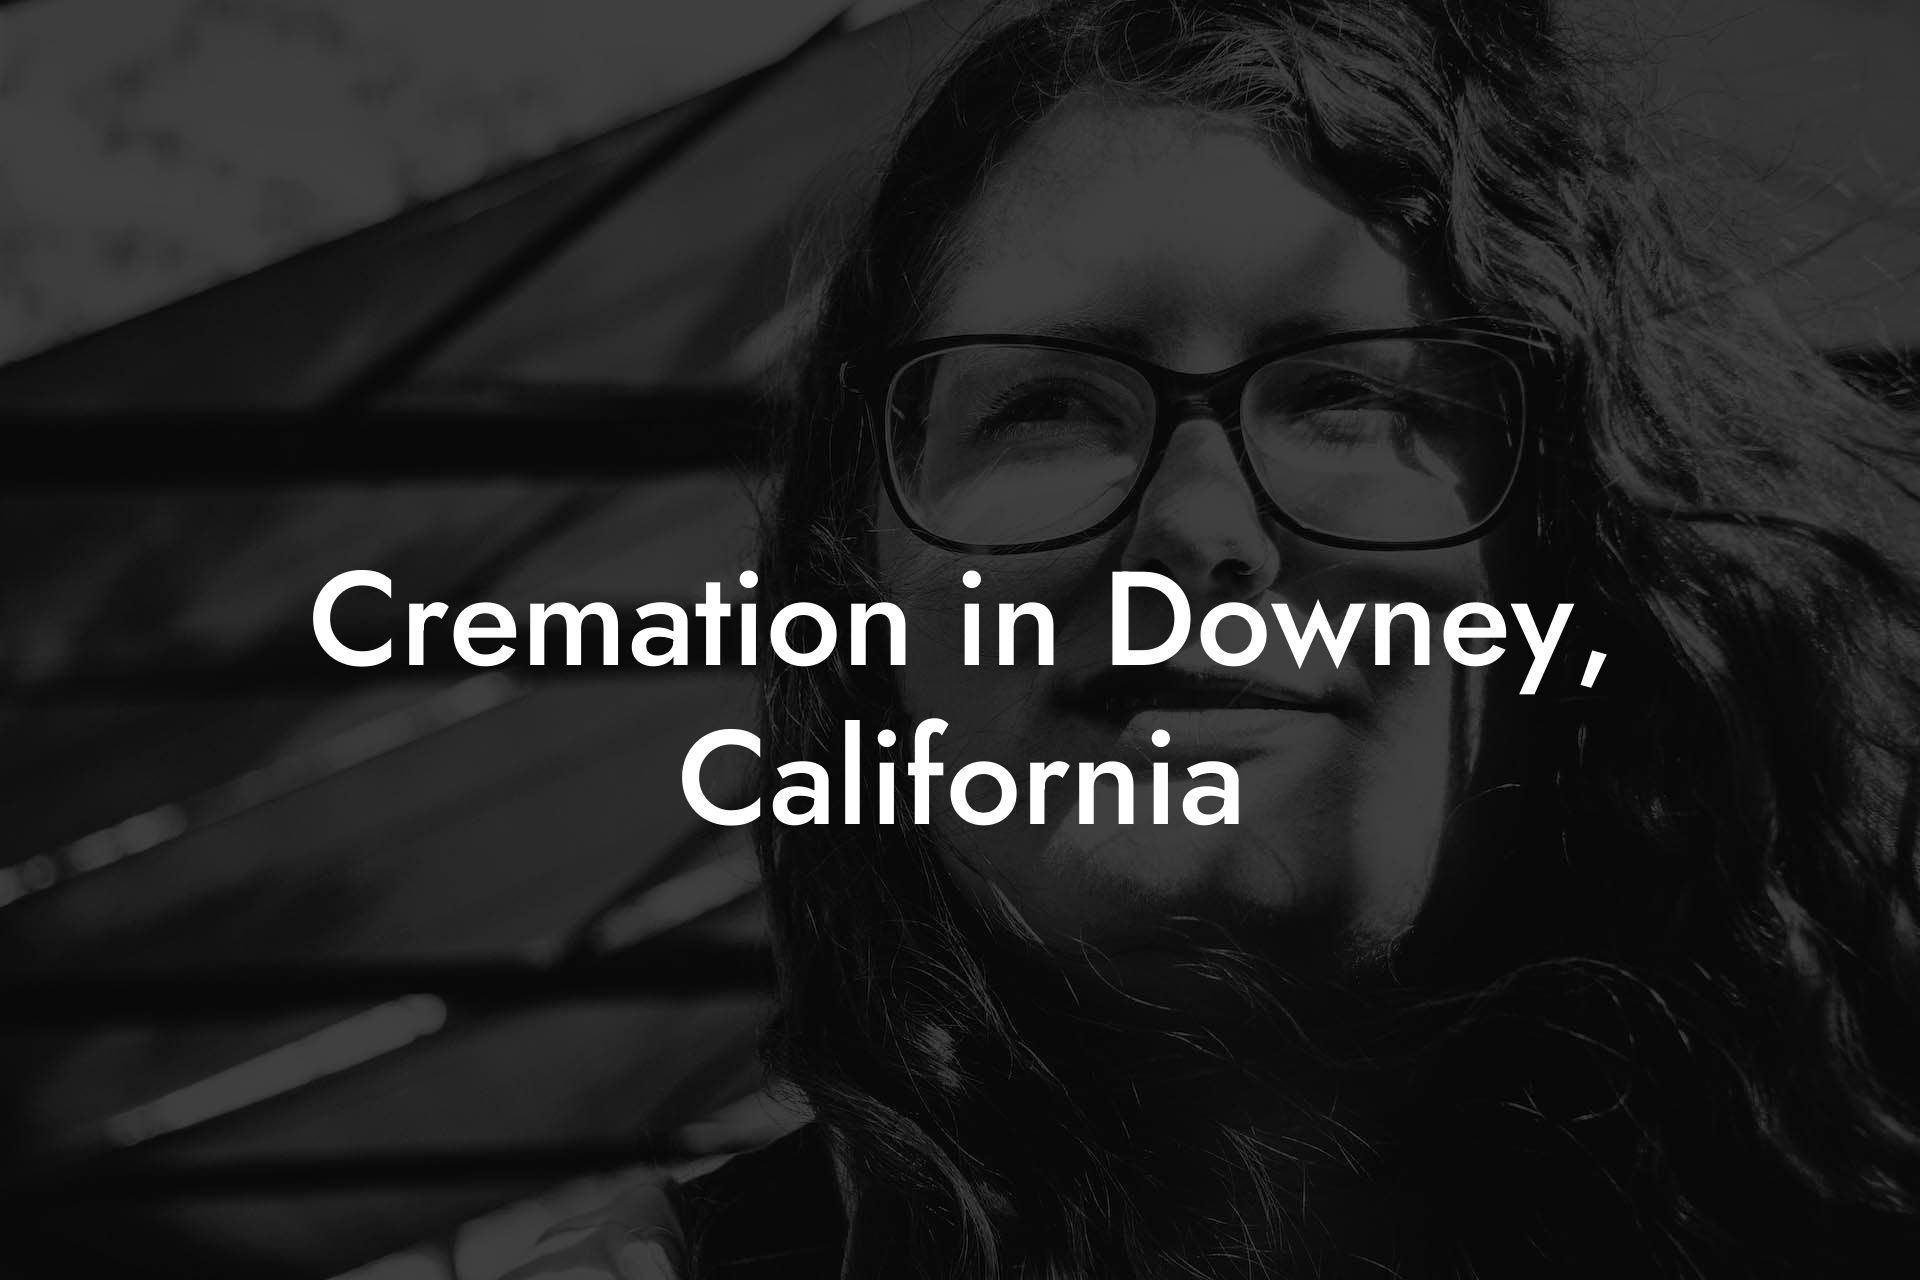 Cremation in Downey, California